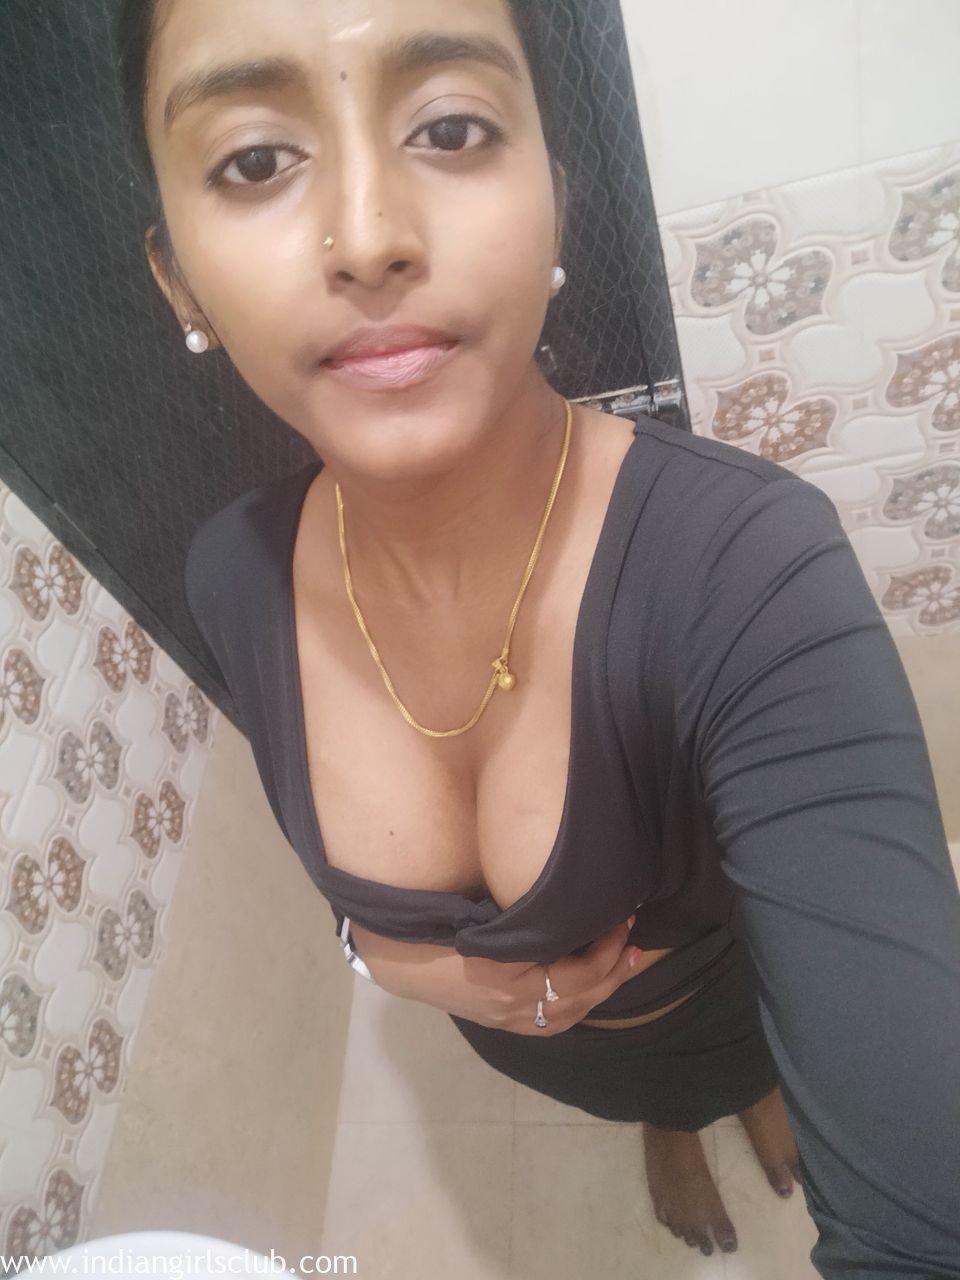 Tamil College Girl Nice Firm Soft Big Boobs